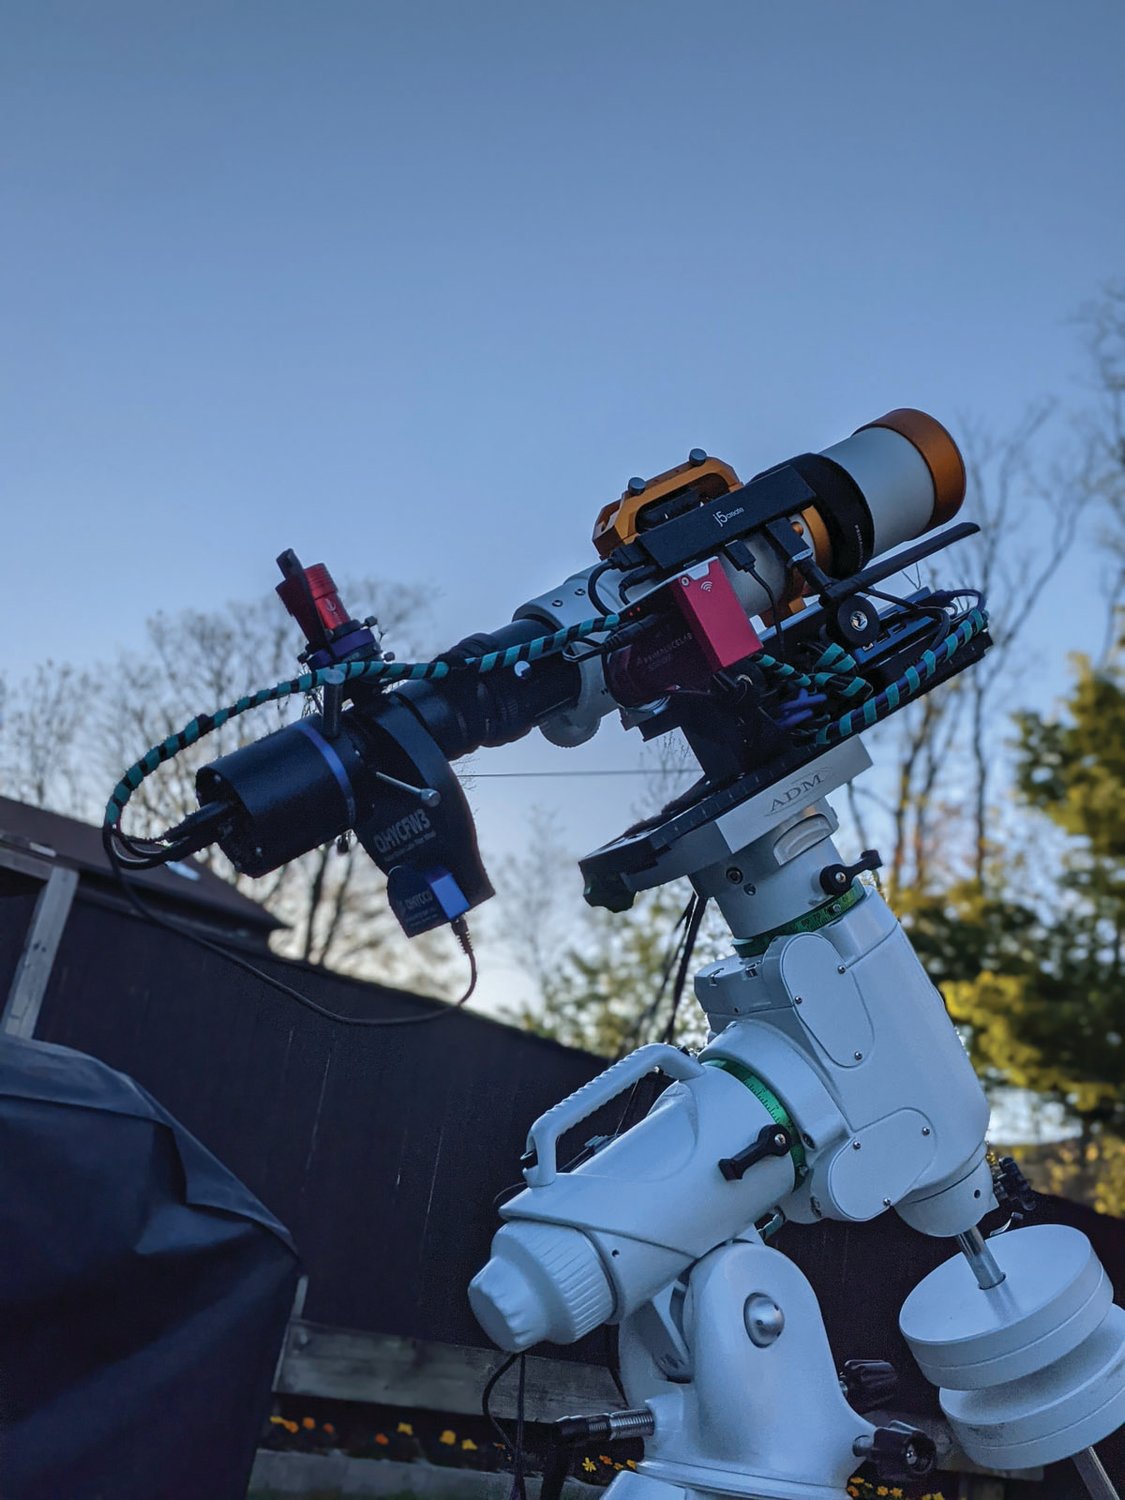 Lucas “Luc” Maguire mounted his DSLR camera to his refractor telescope, and now explores the galaxy from his Johnston backyard.